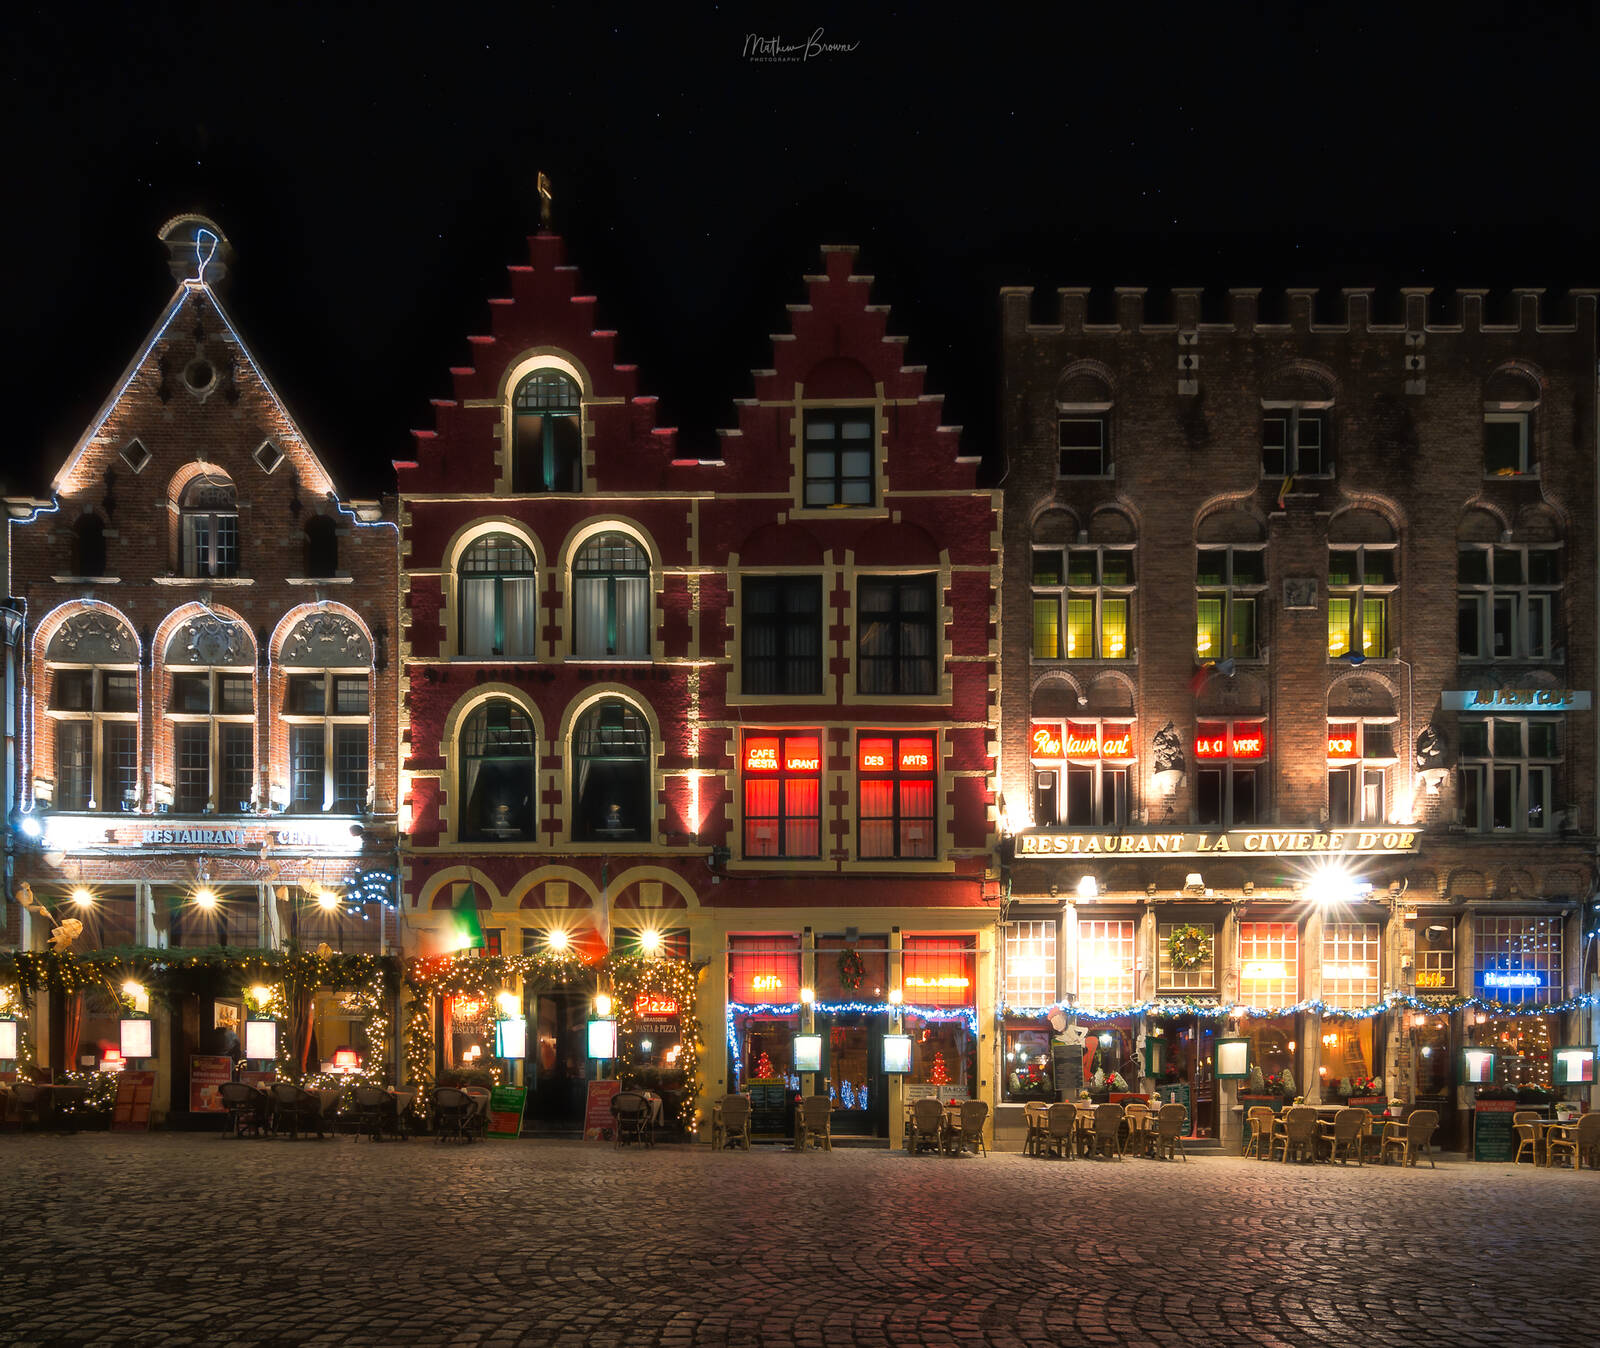 Image of Markt Square by Mathew Browne